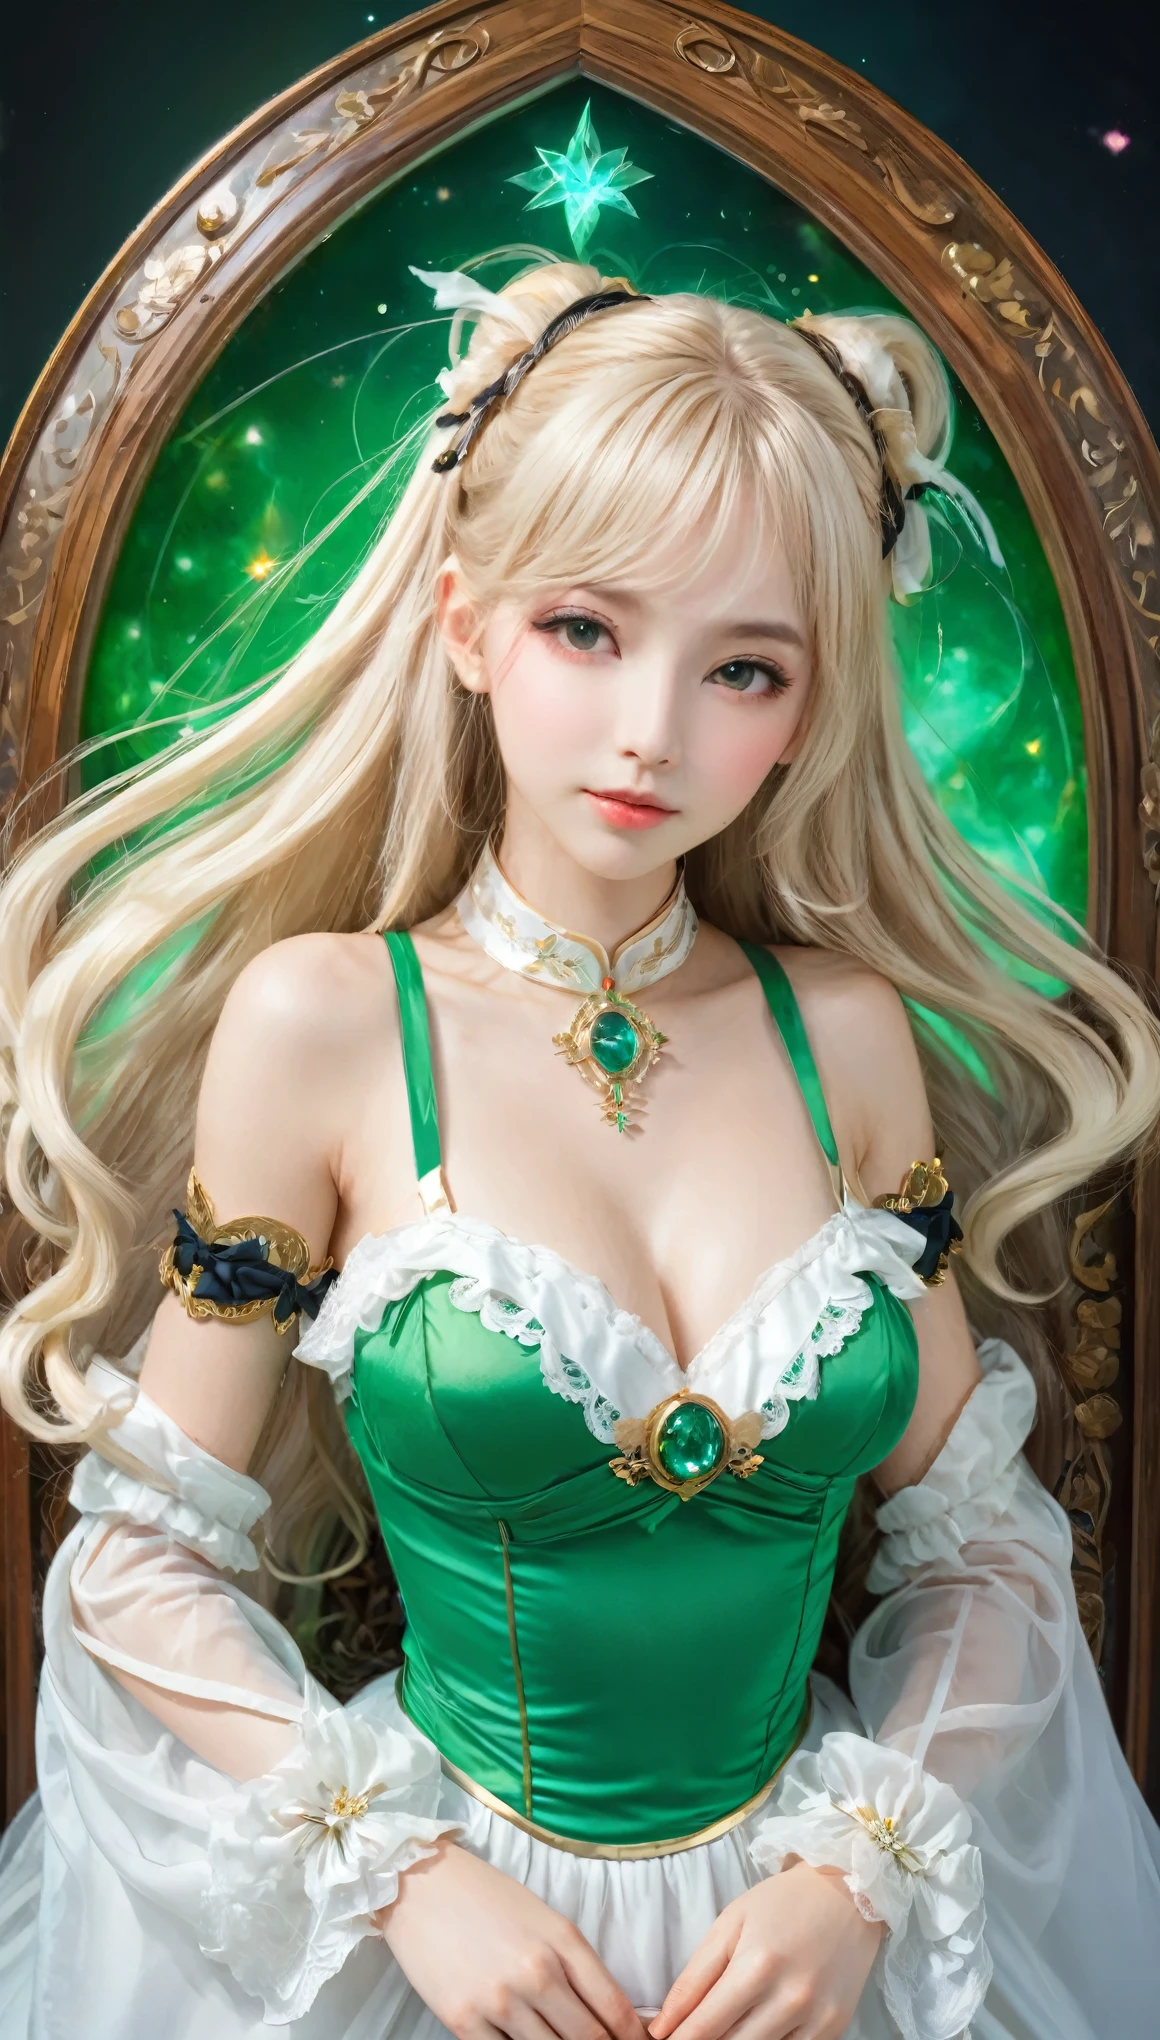 8K resolution, masterpiece, Highest quality, Award-winning works, unrealistic, Only sexy women, healthy shaped body, Age 25, White wavy long hair, twin tail, hair band, huge firm bouncing busts, witch, royal coat of arms, elegant, Very detailed, Digital Painting, artステーション, コンセプトart, Smooth, Sharp focus, shape, artジャム、Greg Rutkowski、Alphonse Mucha、William Adolphe Bouguereau、art：Stephanie Law , Magnificent cosmic background, Royal Jewel, nature, Full Shot, Symmetric, Greg Rutkowski, Charlie Bowwater, beep, Unreal 5, Surreal, Dynamic Lighting, ファンタジーart, Complex colors, カラフルなmagic陣, magic, Small face, Very delicate facial expressions, Delicate eye depiction, Upper body close-up,, erotic, dynamic sexy poses, One sexy woman, Healthy body shape, 24-year-old woman, doaxvv_marie rose, witch, Height: 170cm, big firm bouncing busts, , blonde very long wavy hair, twin tail,, Top view, Glaring at the camera, Looking up, Invincible laughter, A complex, gothic-style long dress, , Green long skirt, garter belt, Brown Loafers, Standing Alone